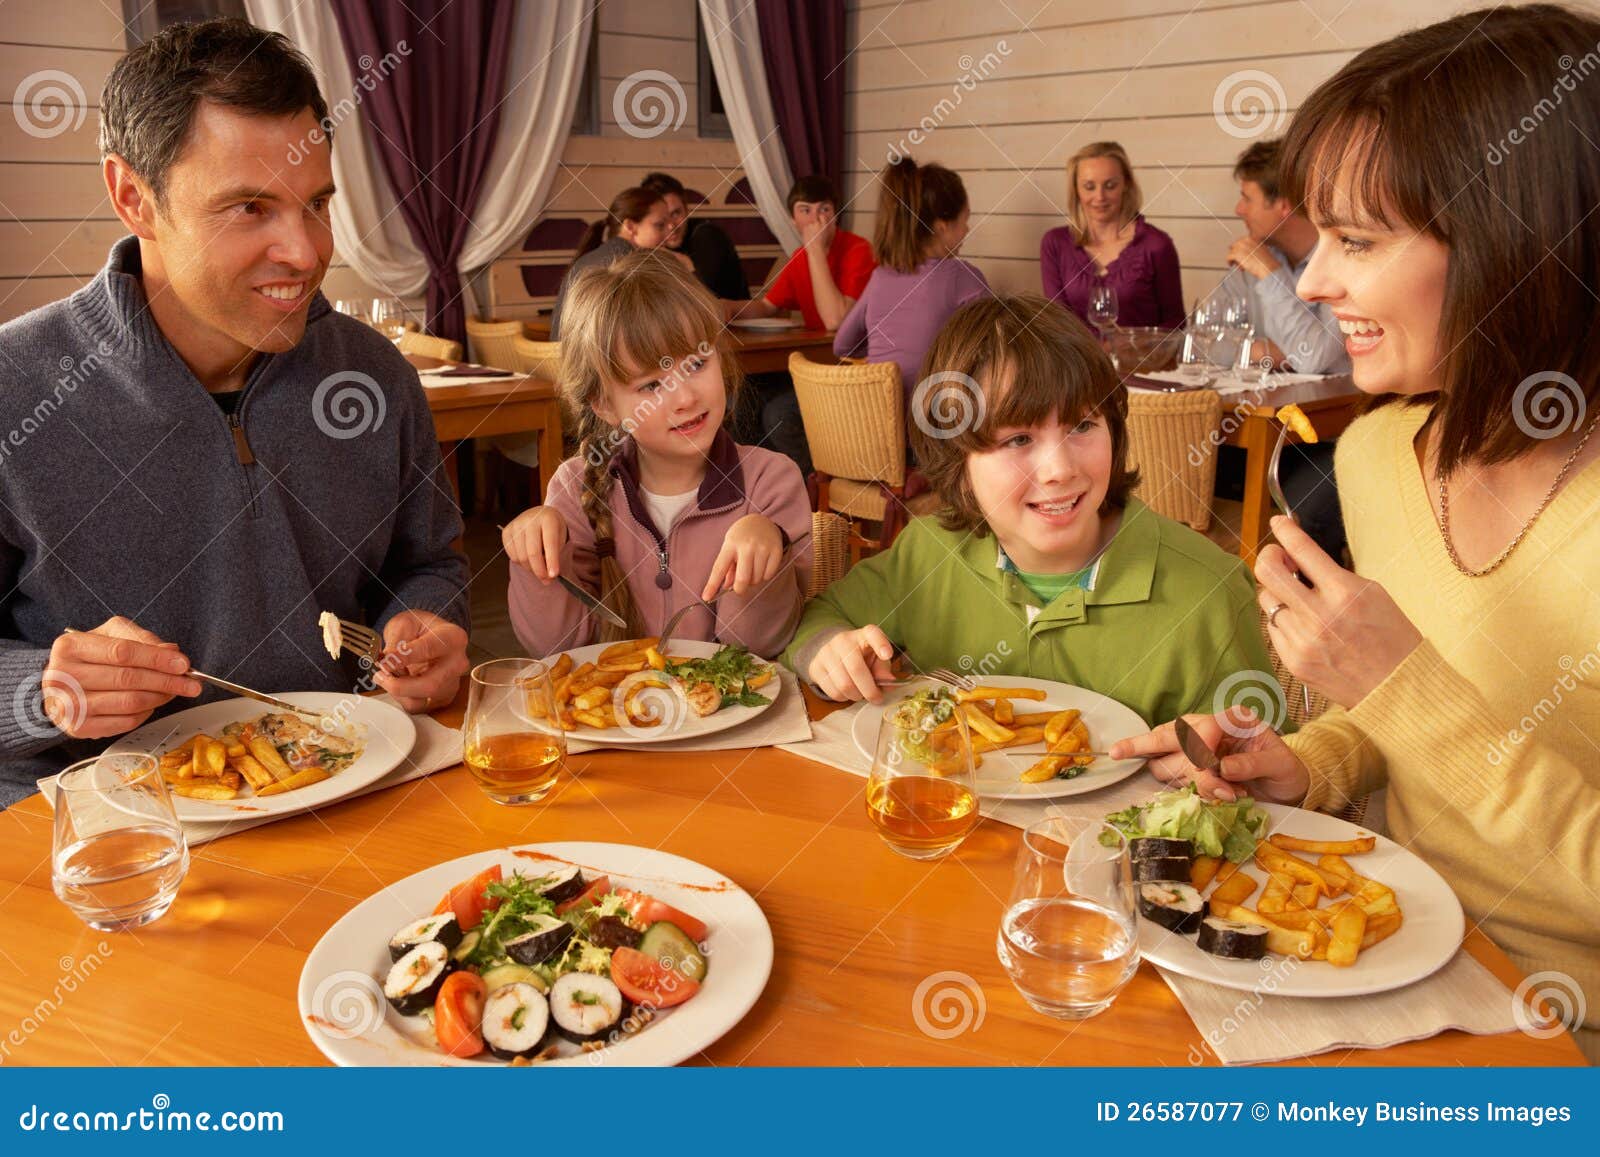 Family Eating Lunch Together In Restaurant Stock Image - Image: 26587077